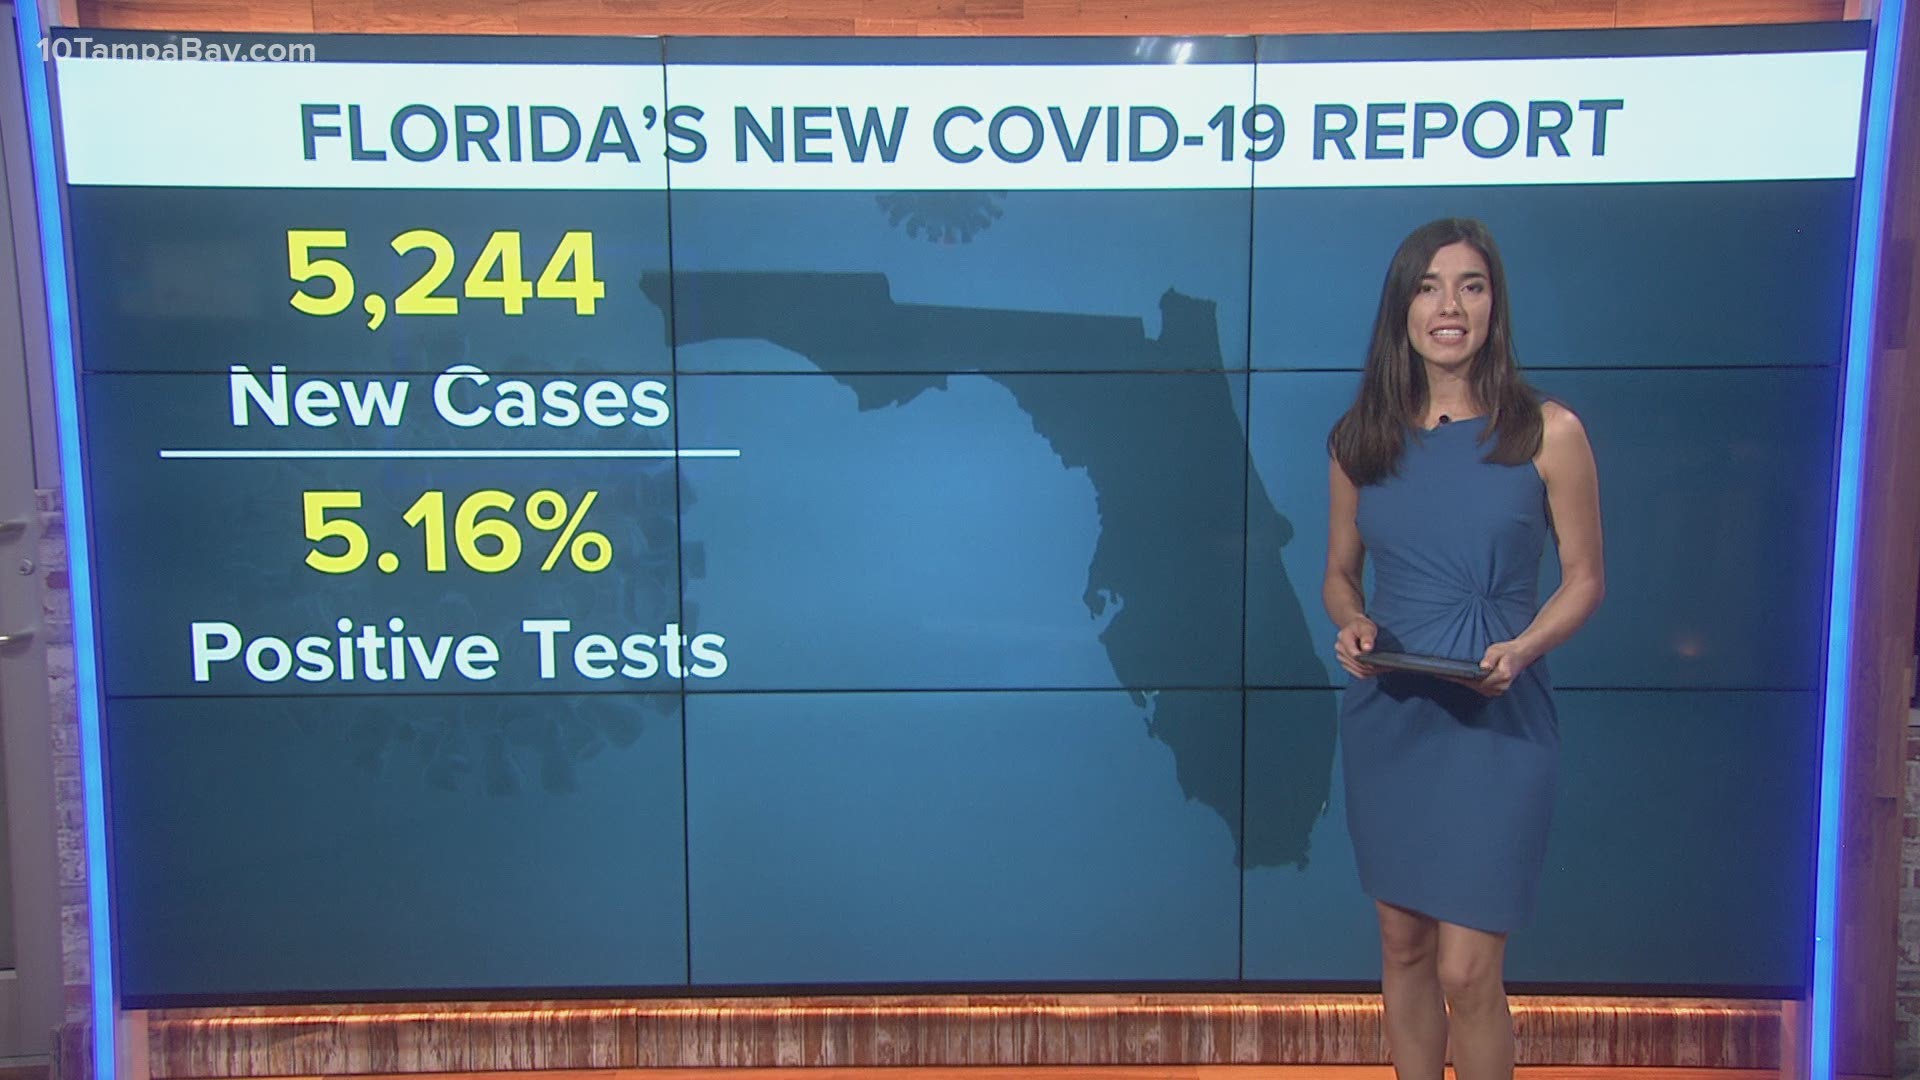 The percent positivity for new cases is 5.16 percent.